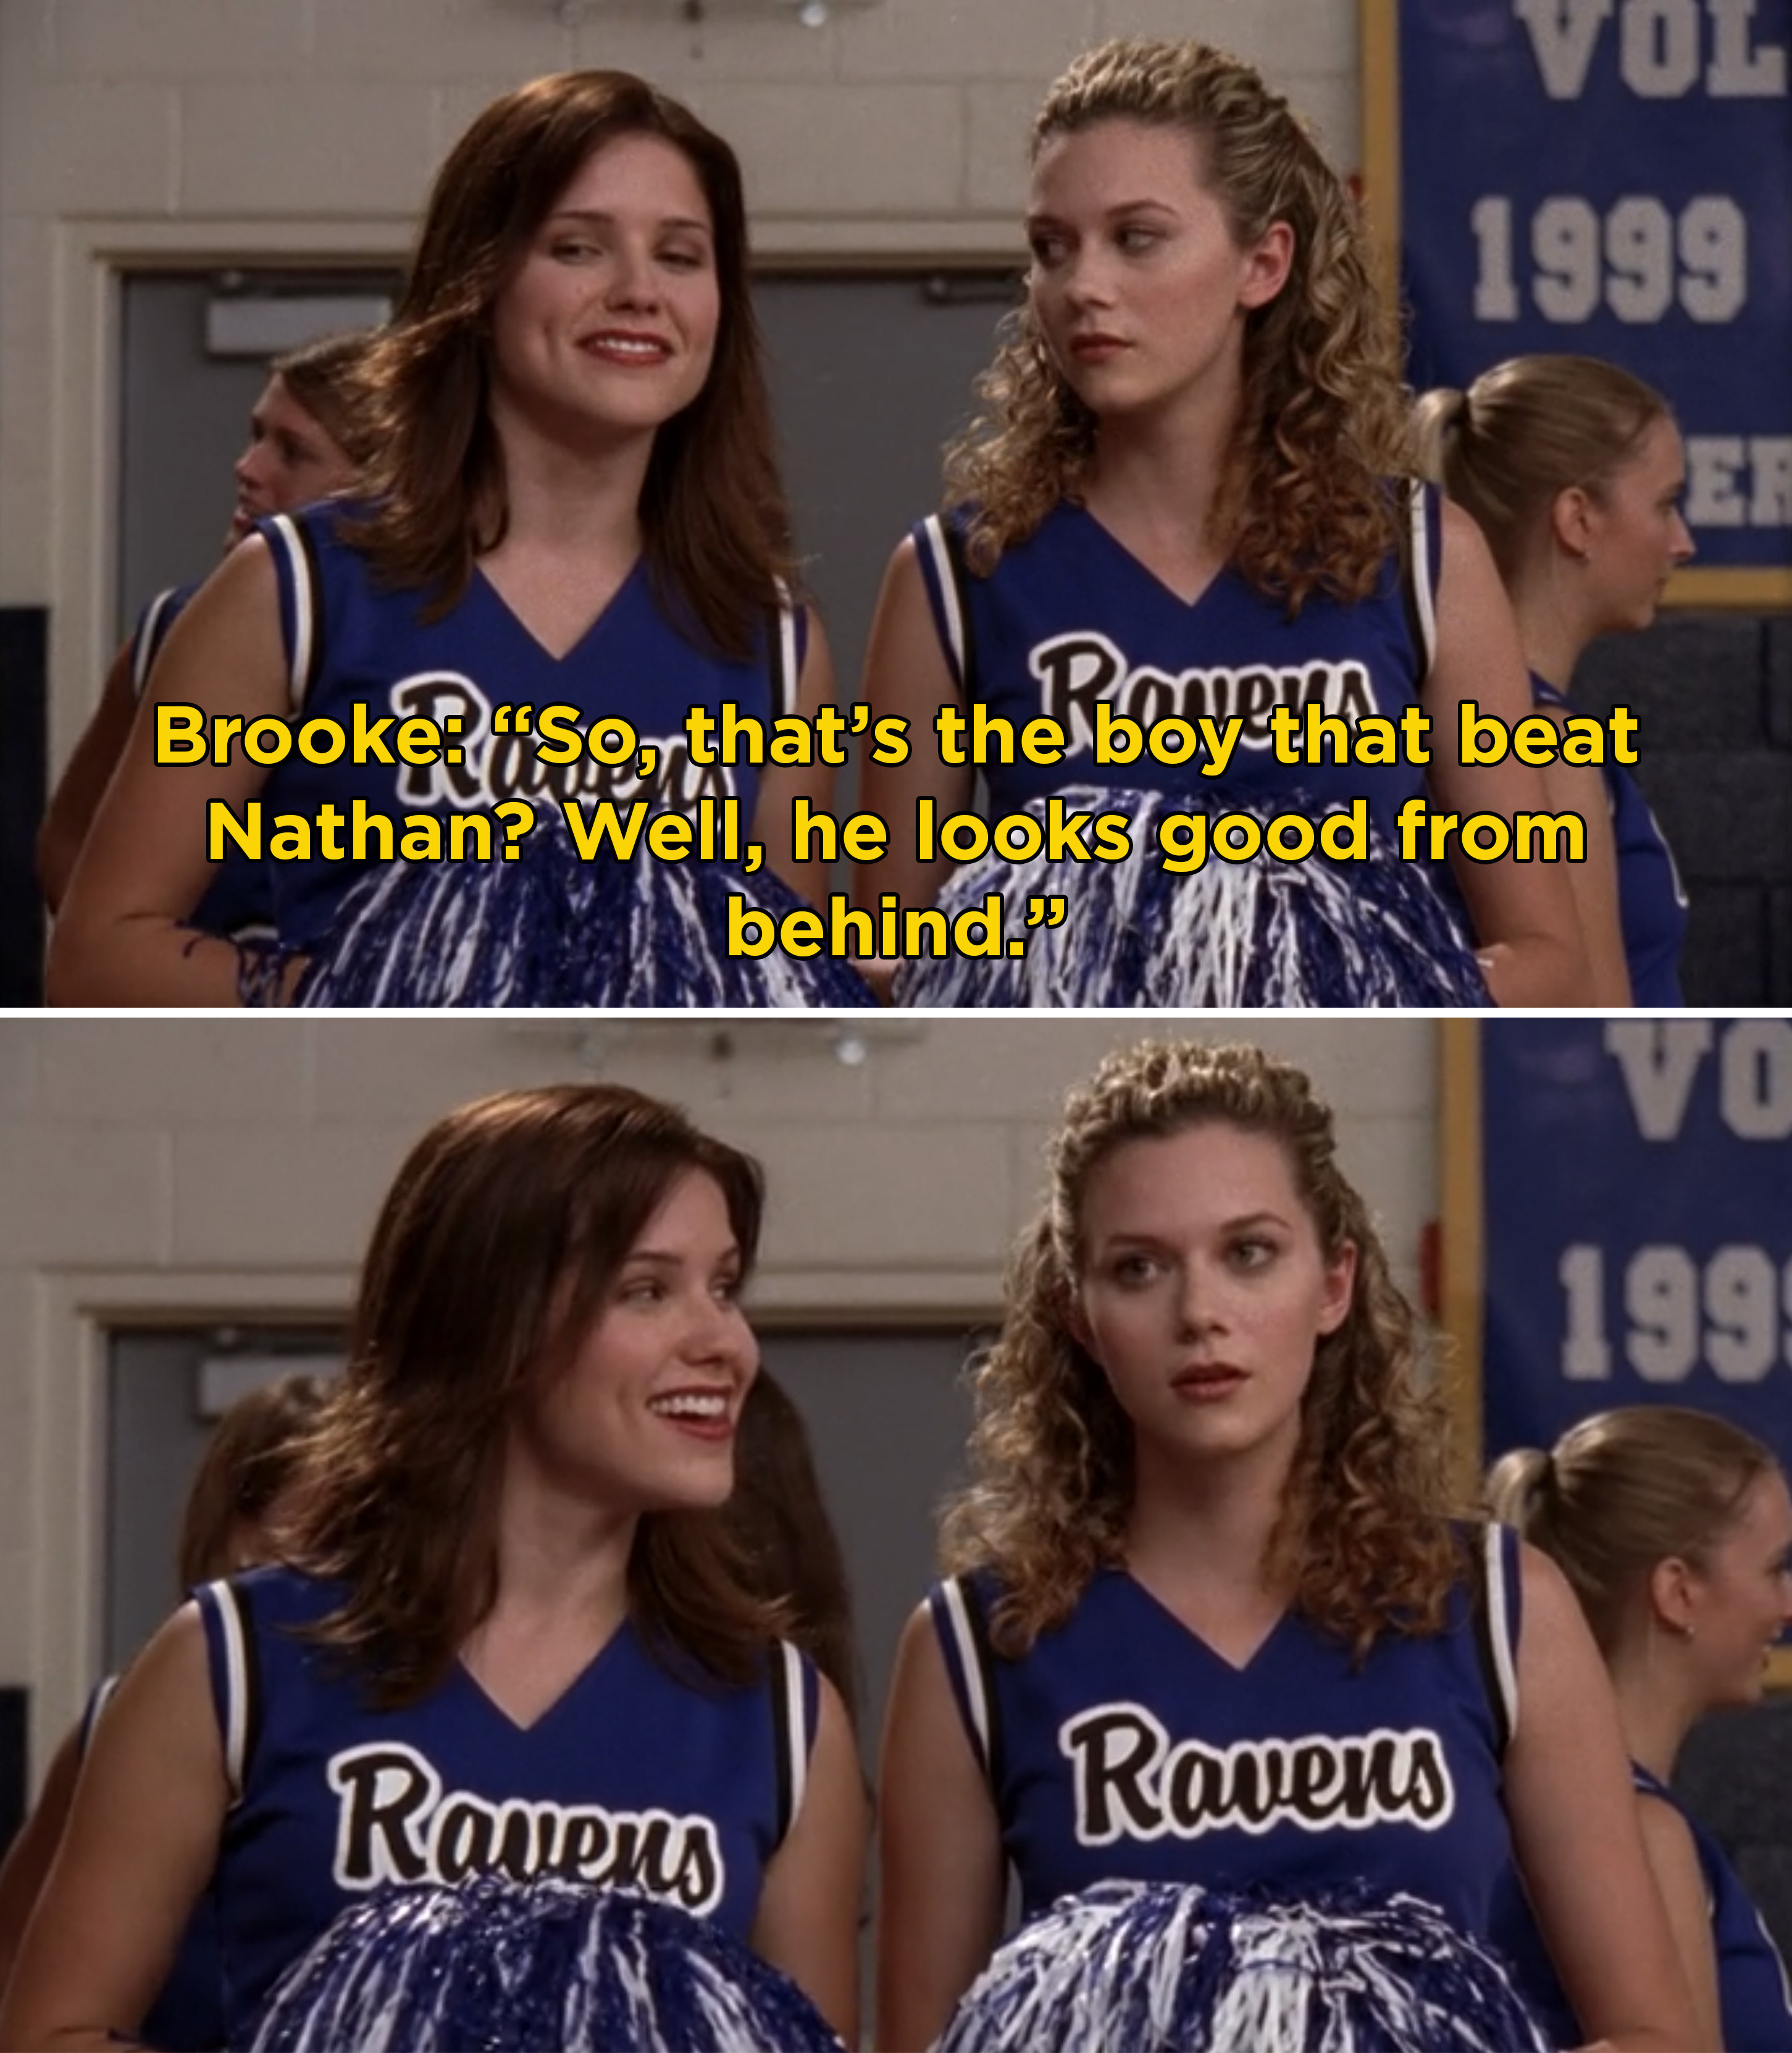 Brooke telling Peyton, "So, that's the boy that beat Nathan? Well, he looks good from behind"